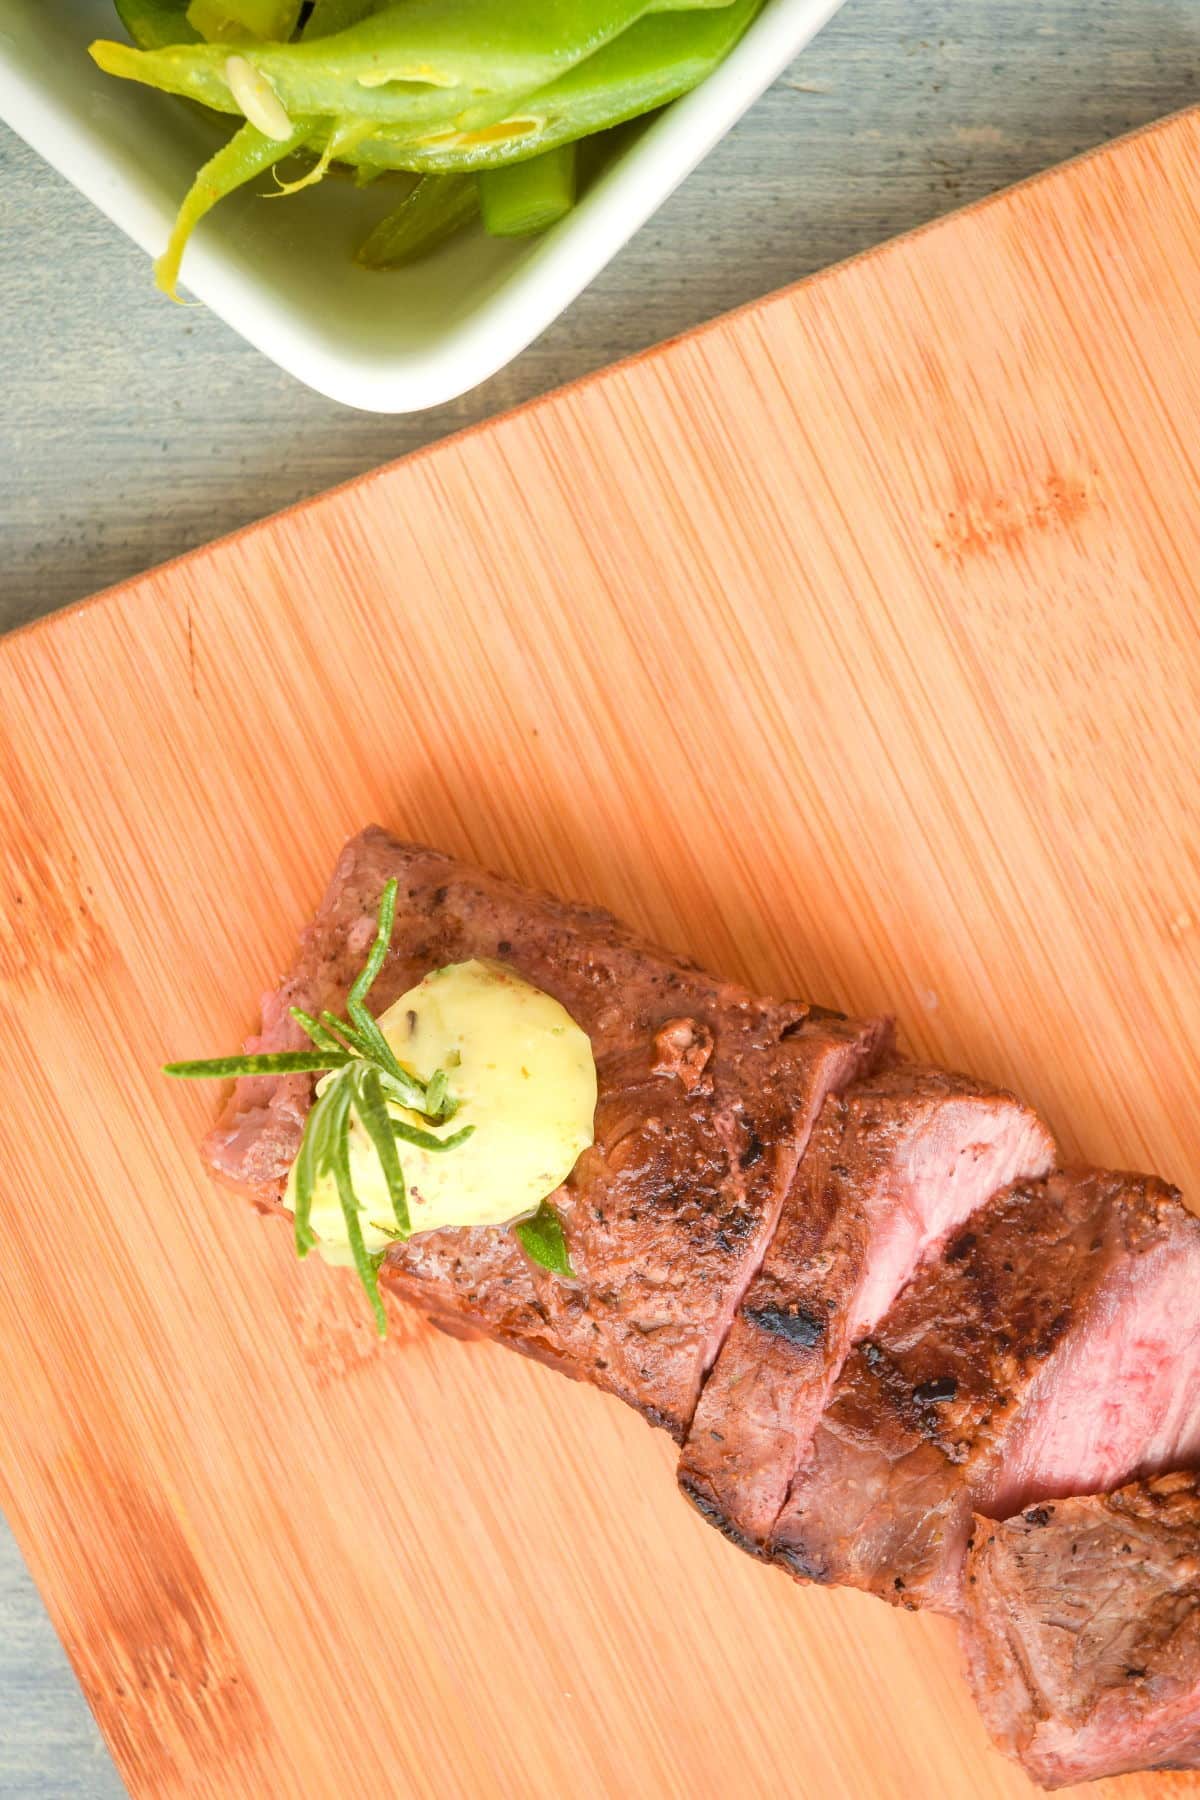 Sliced steak on a cutting board with herb butter.